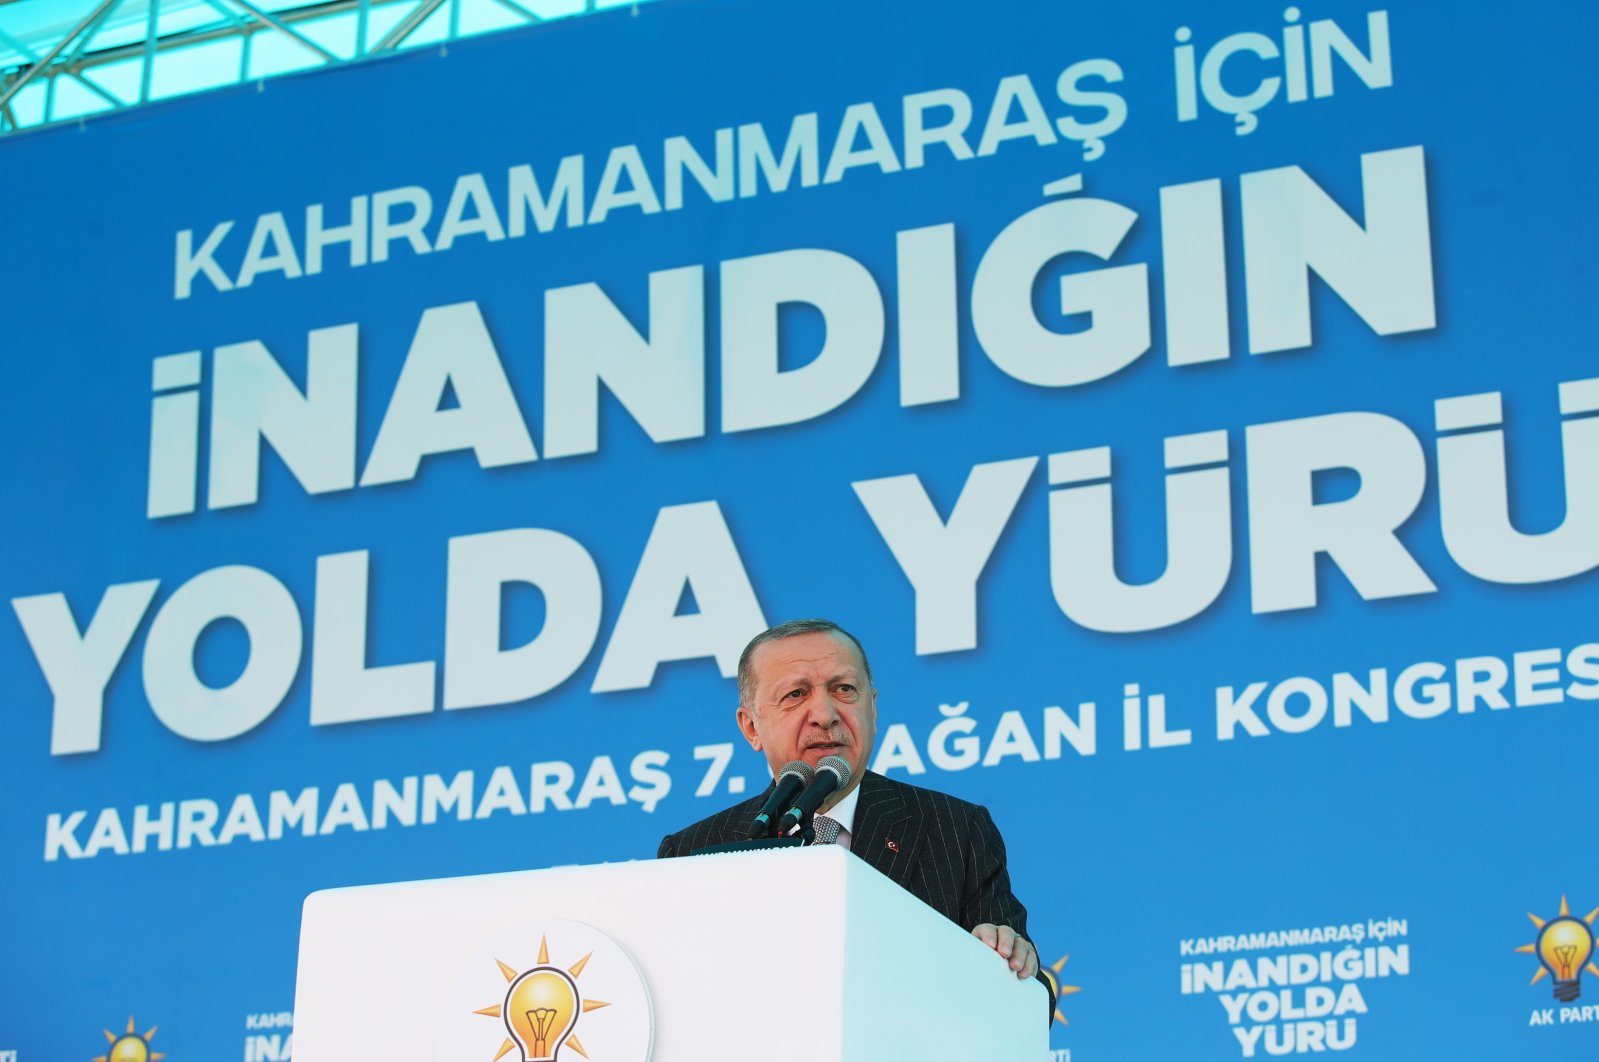 President Recep Tayyip Erdoğan speaks at the 7th Ordinary Congress of the Justice and Development Party (AK Party) in Kahramanmaraş, Turkey, Nov. 7, 2020 (AA Photo)